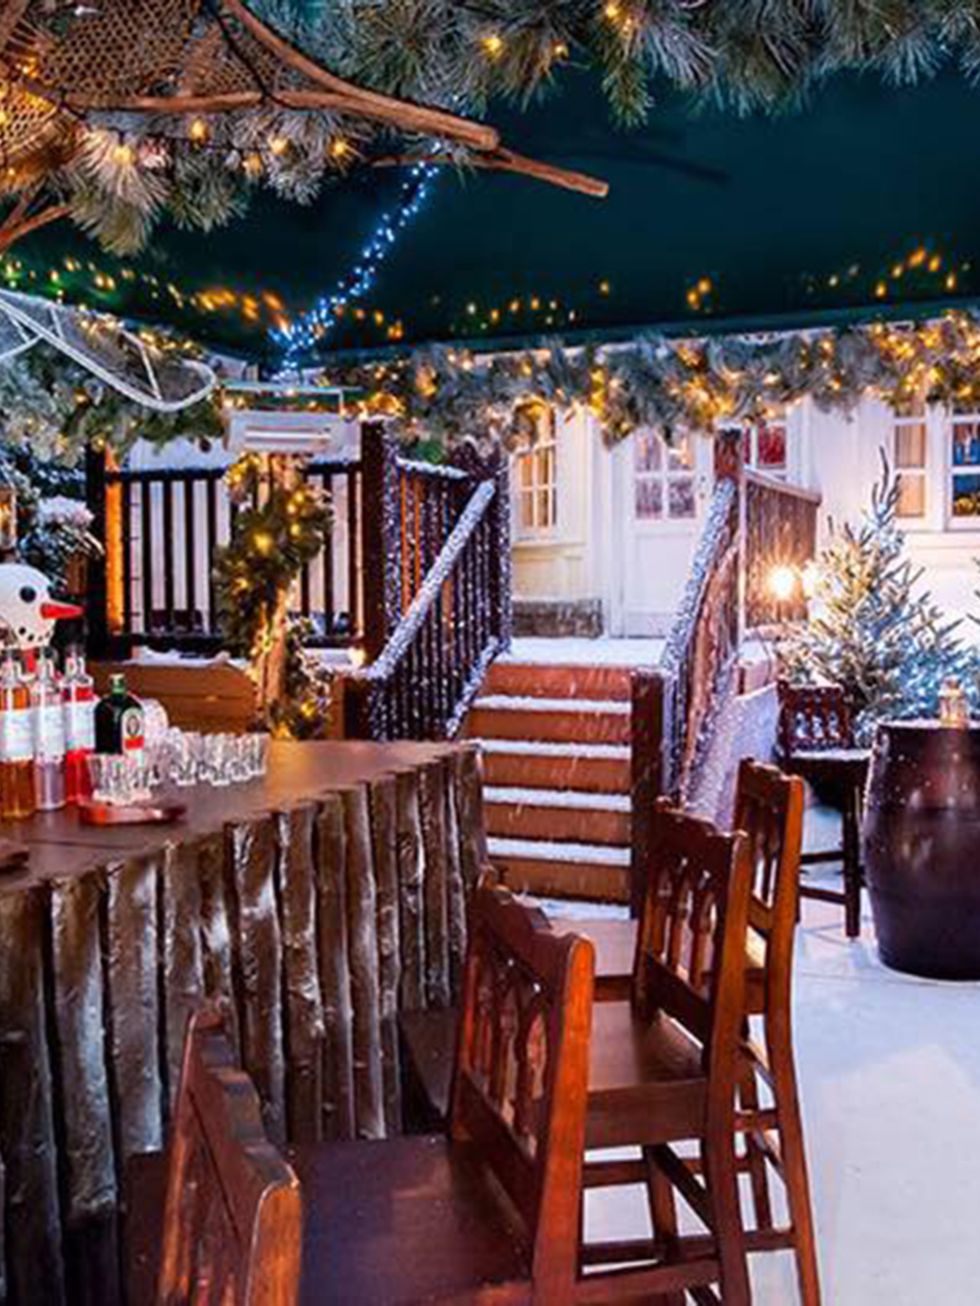 <p>DRINK: Ski Lodge at the Montague</p>

<p>Throwing yourself down a mountain on a pair of sticks is all well and good, but everyone knows skiing is really all about the après. Which is why we love this festive pop-up at The Montague, which dispenses with